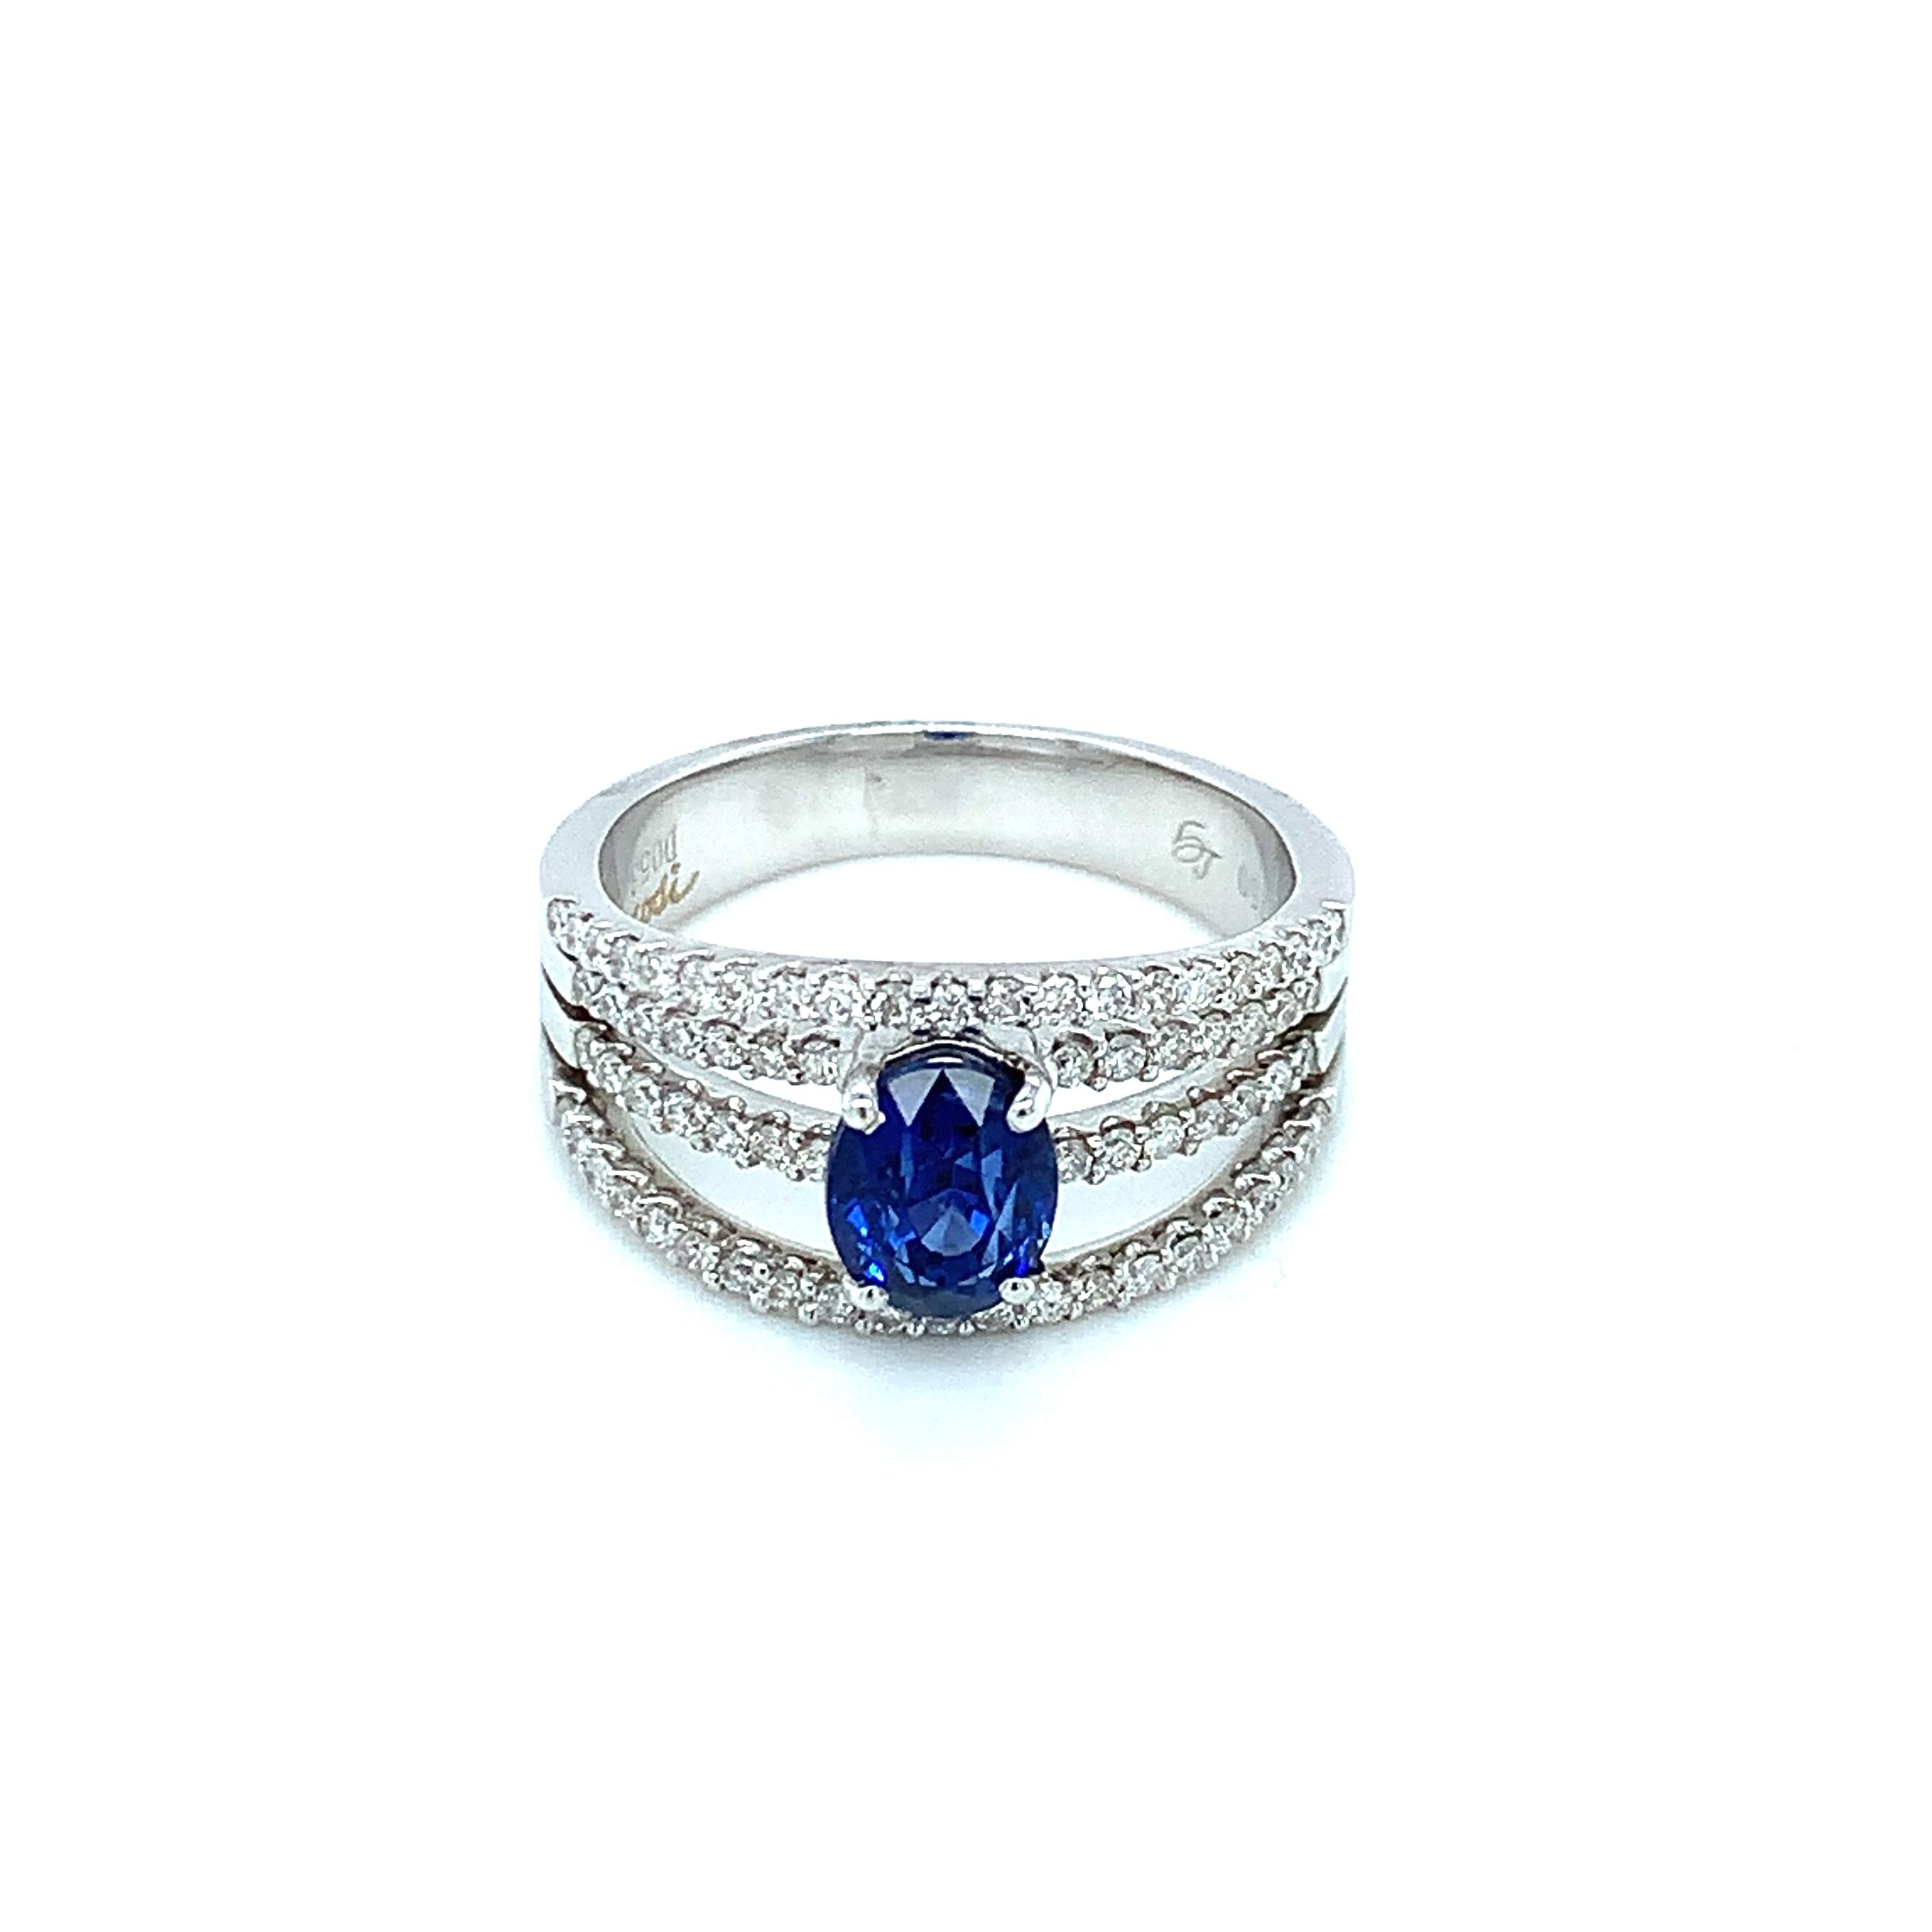 Royal Blue Sapphire and 4-Row Diamond Engagement Ring in White Gold, 1.56 Carat  For Sale 2